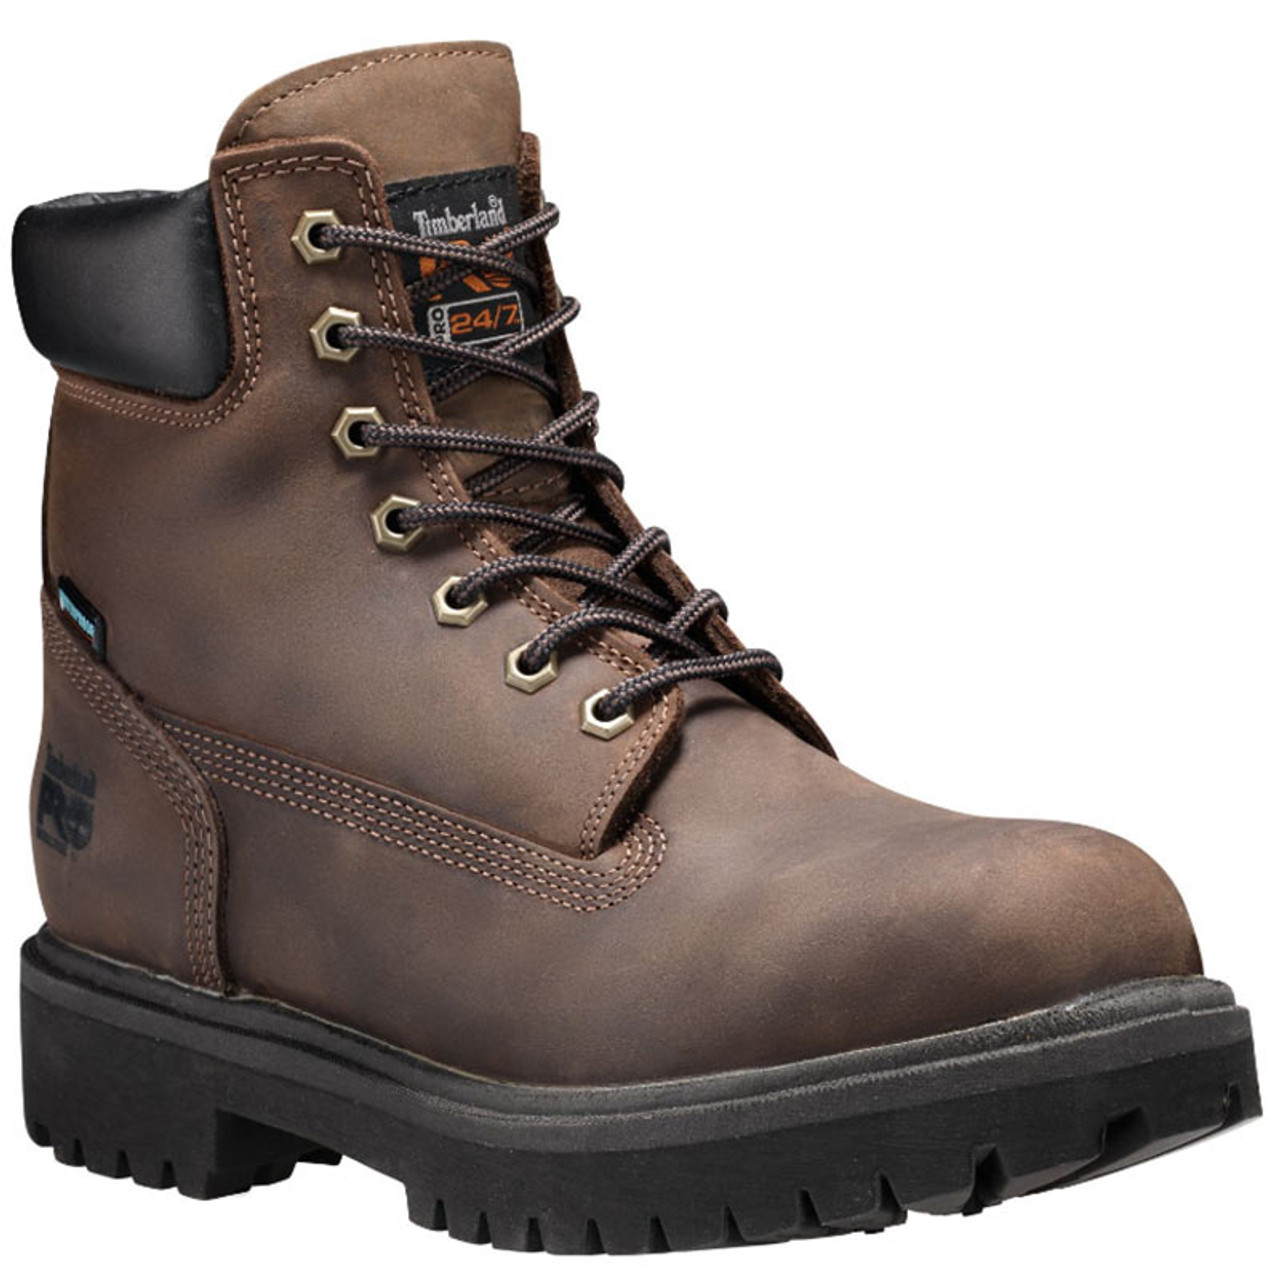 Timberland PRO 38021242 ATTACH 6" STEEL TOE Brown Work Boots - Footwear